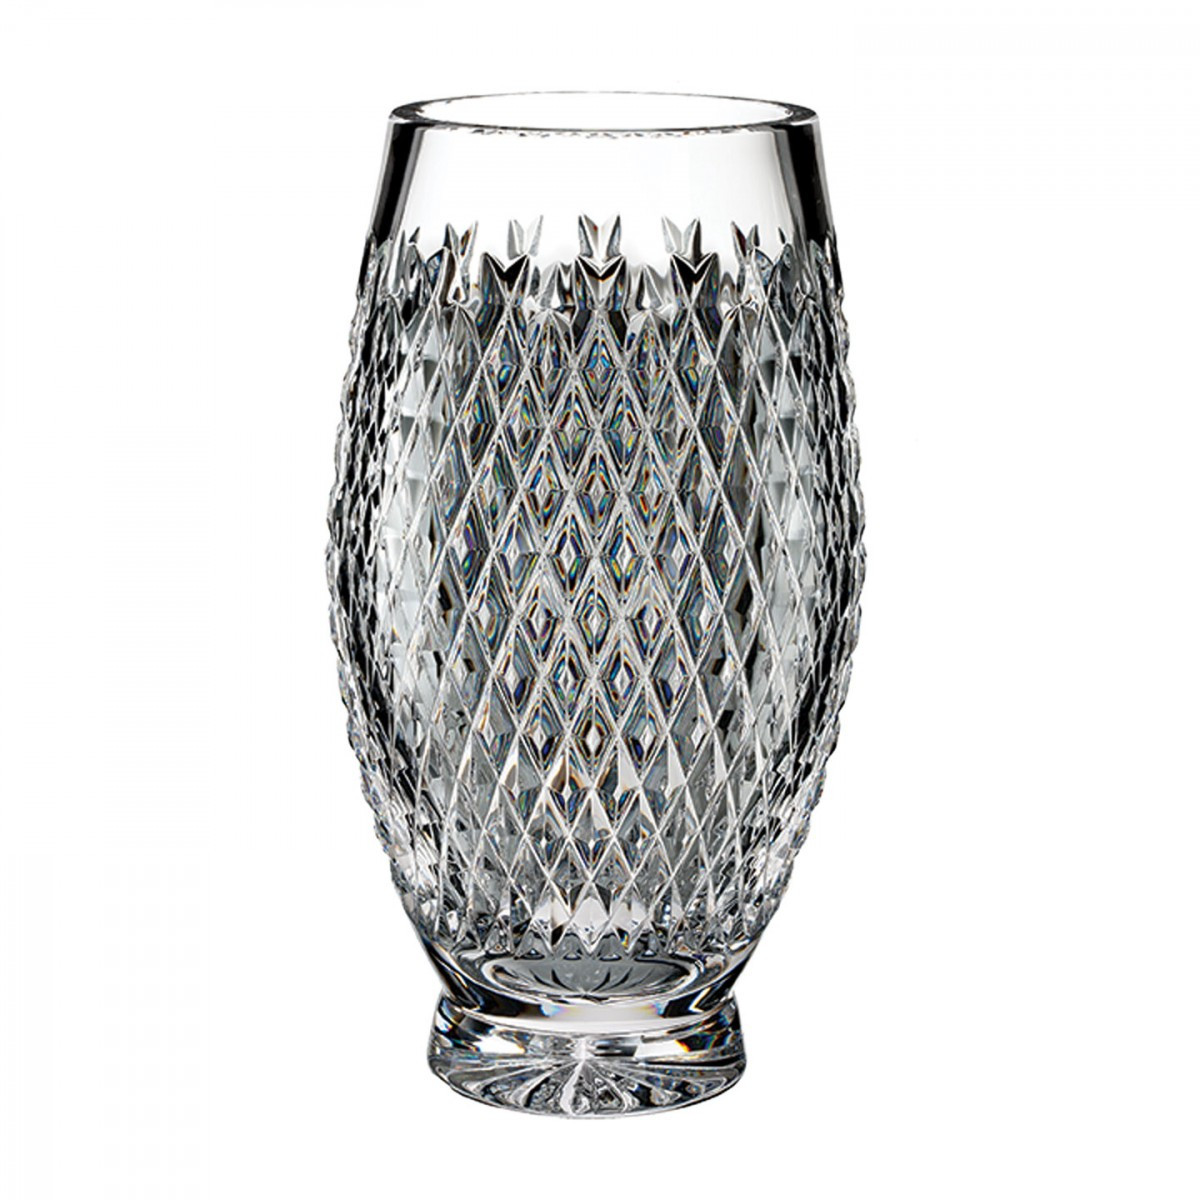 waterford 6 inch vase of alana 12in vase house of waterford crystal us with alana 12in vase